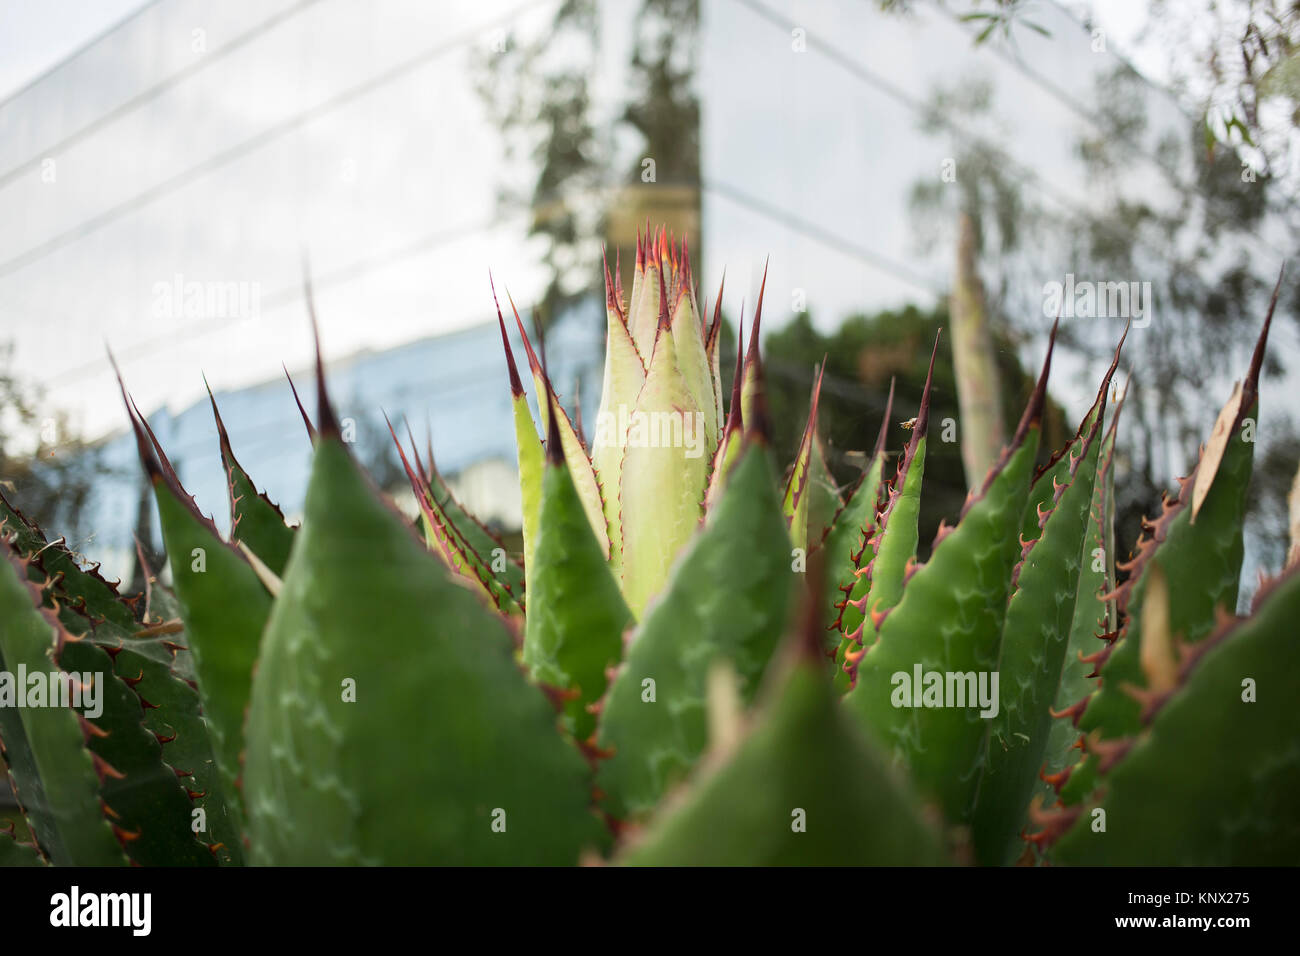 Cacti in front of blurred building Stock Photo